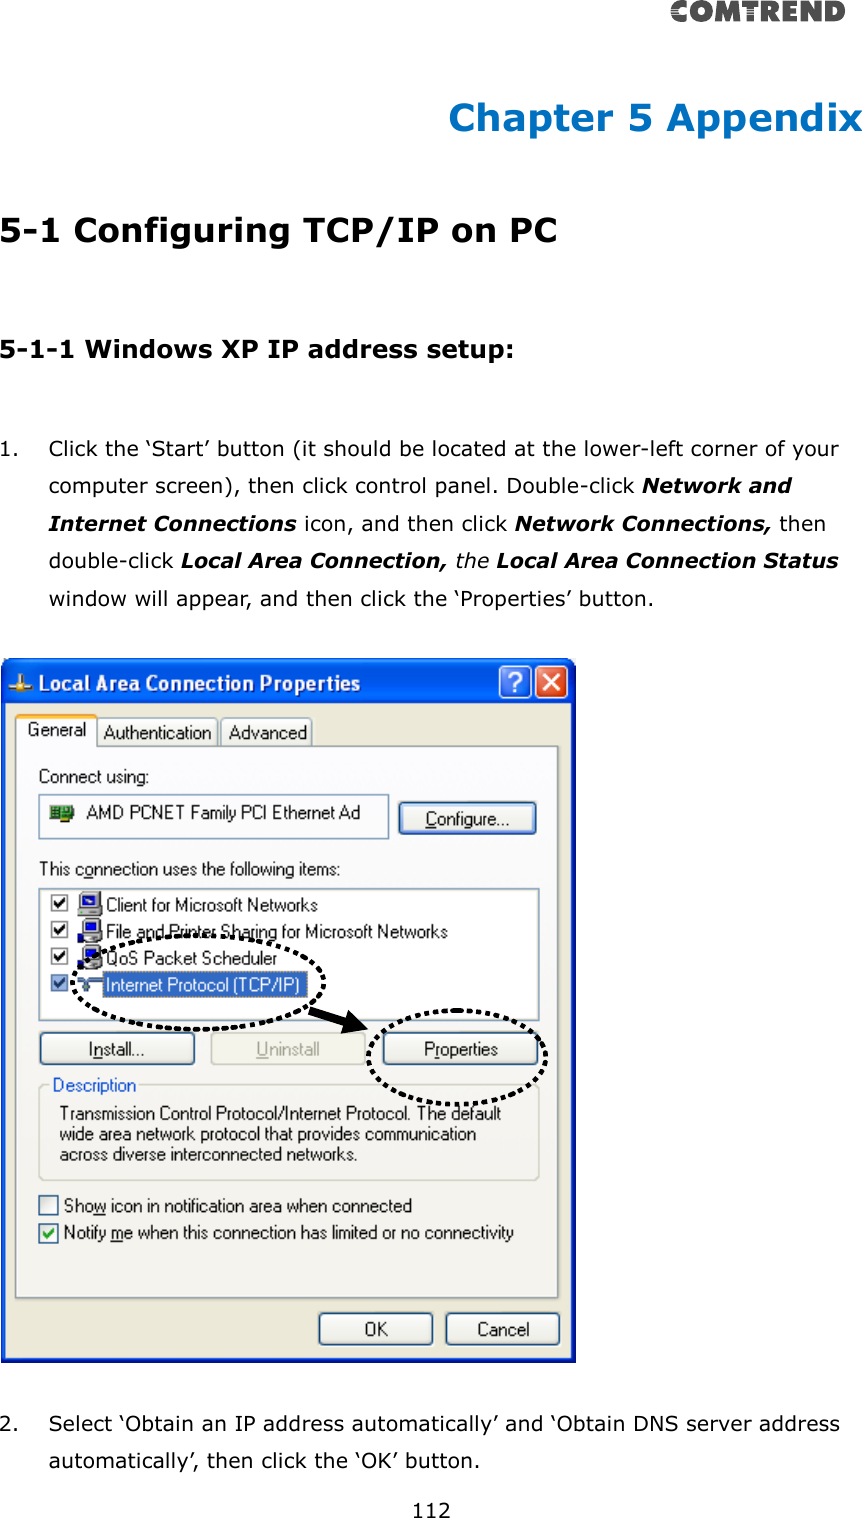       112  Chapter 5 Appendix 5-1 Configuring TCP/IP on PC  5-1-1 Windows XP IP address setup:  1. Click the ‘Start’ button (it should be located at the lower-left corner of your computer screen), then click control panel. Double-click Network and Internet Connections icon, and then click Network Connections, then double-click Local Area Connection, the Local Area Connection Status window will appear, and then click the ‘Properties’ button.    2. Select ‘Obtain an IP address automatically’ and ‘Obtain DNS server address automatically’, then click the ‘OK’ button. 